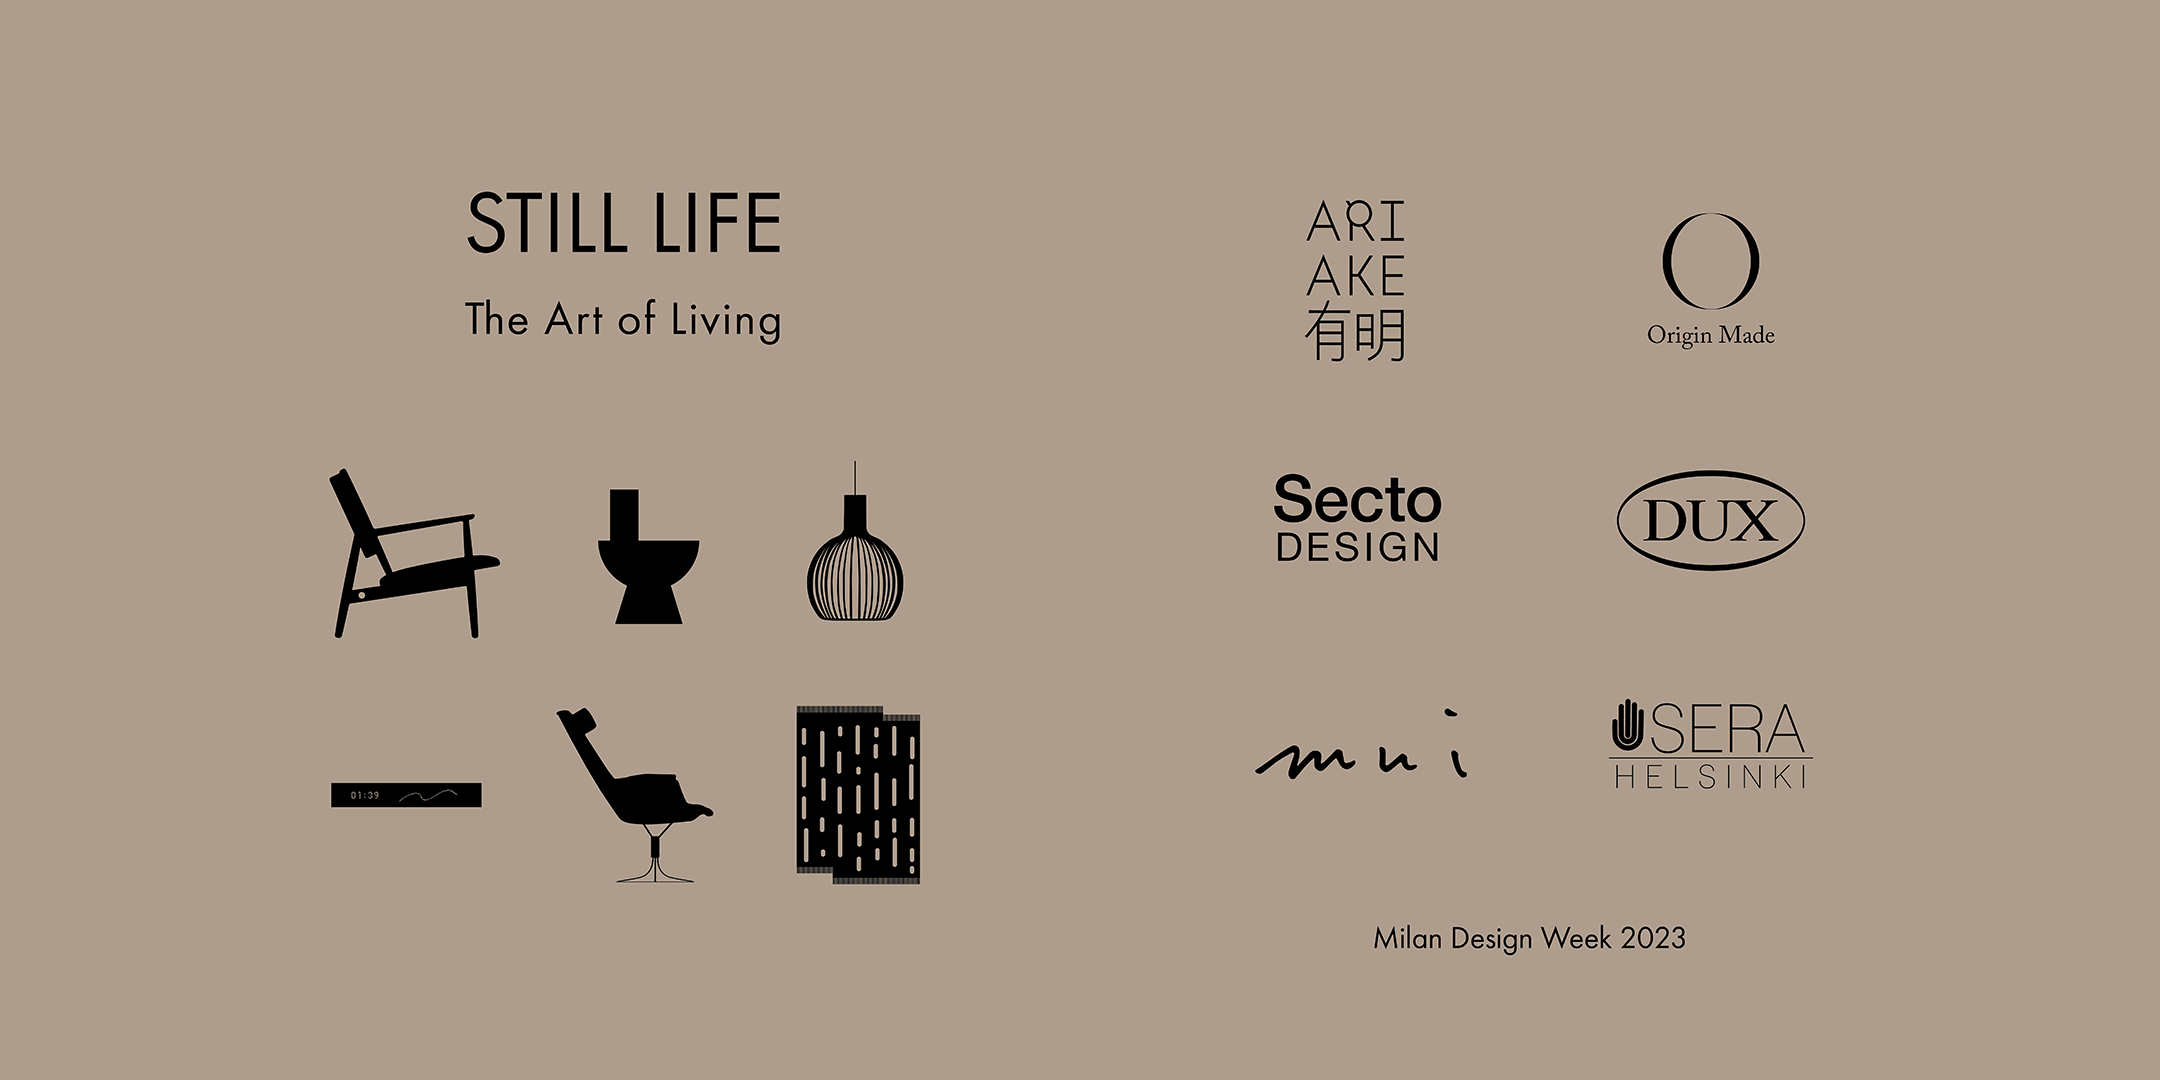 mui Lab to Present a Calm Home Interface That Fosters    Wellbeing & Familial Bonding in ‘Still Life — The Art of Living’ Fuorisalone Collection During Milan Design Week 2023 